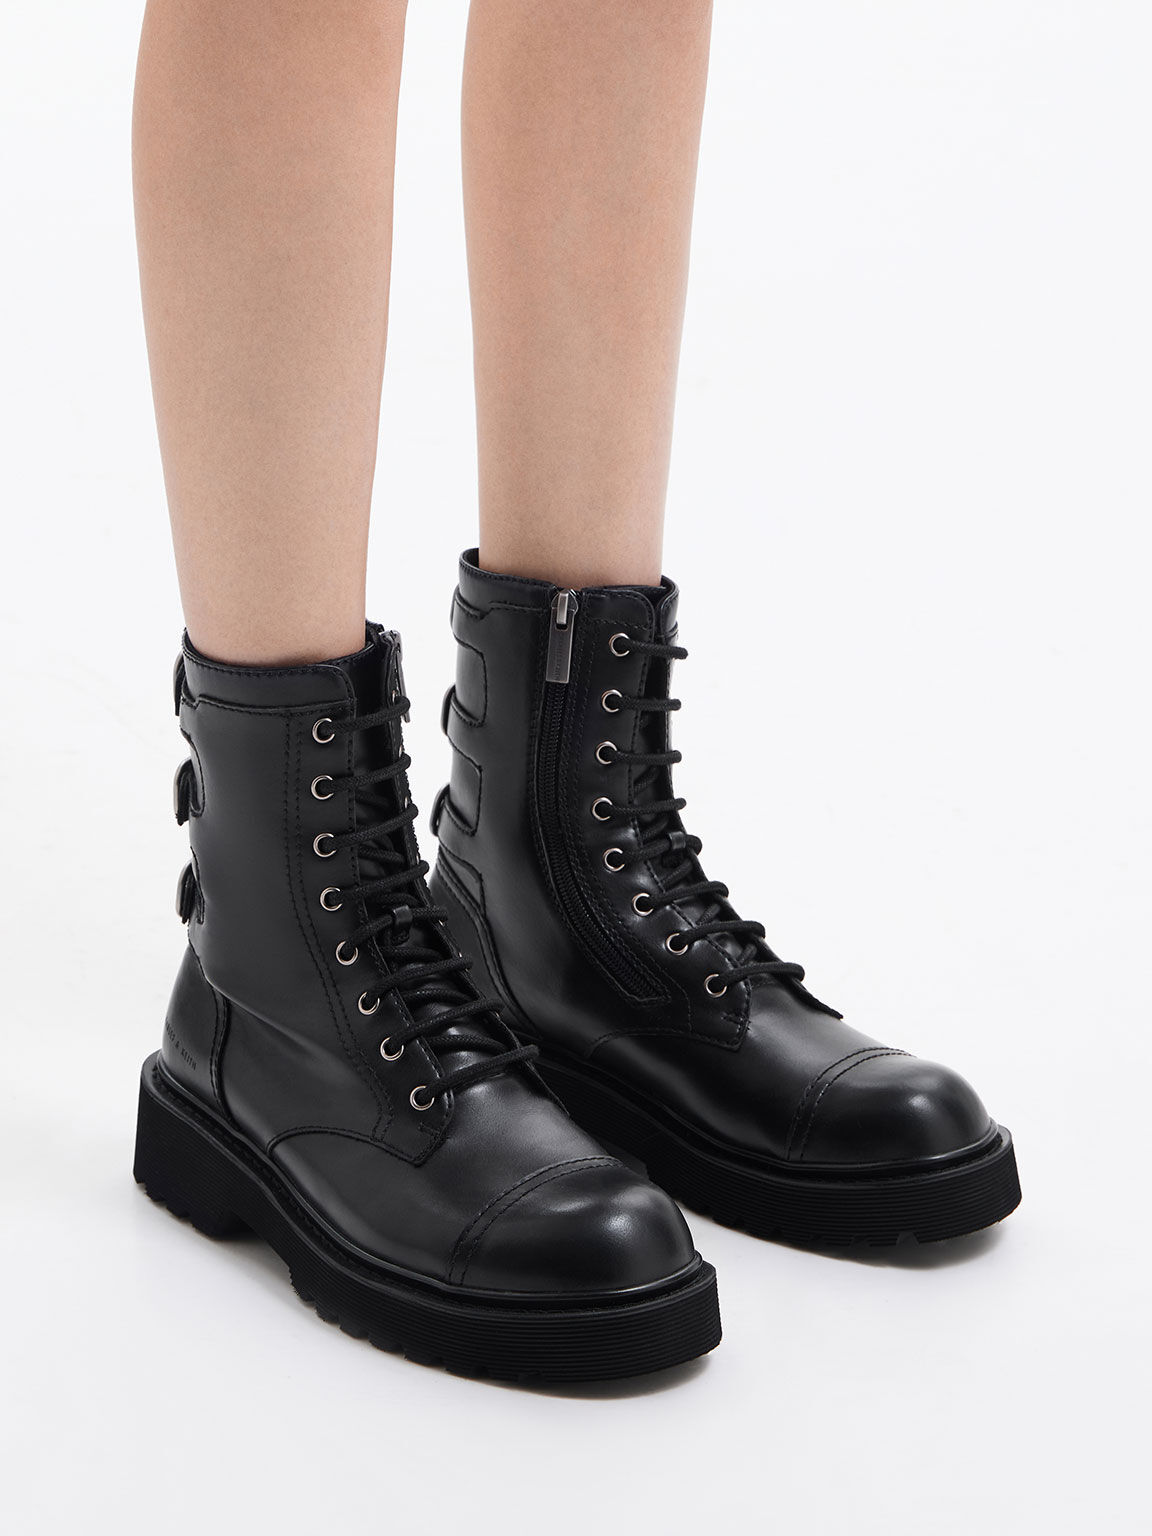 SALE限定セールLace-up Ankle Boots 靴